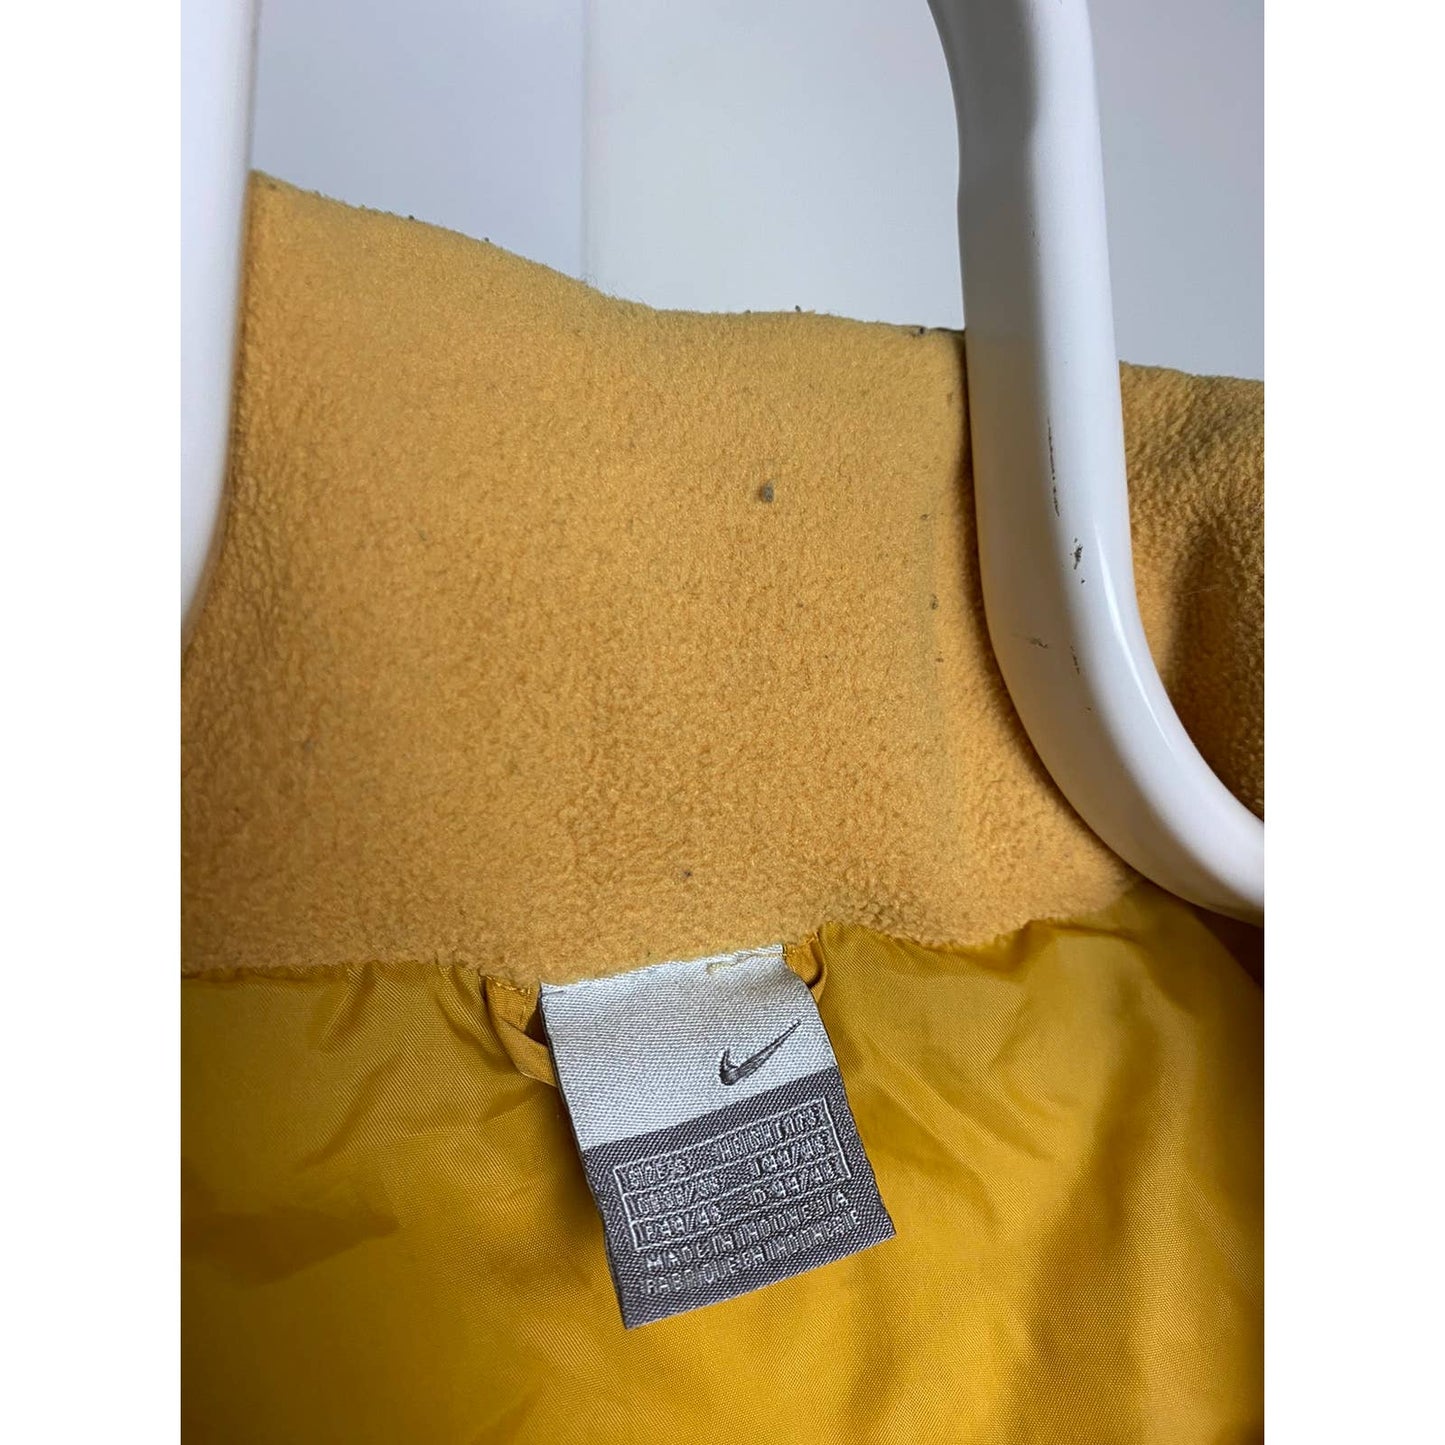 Nike vintage yellow puffer vest small swoosh 2000s